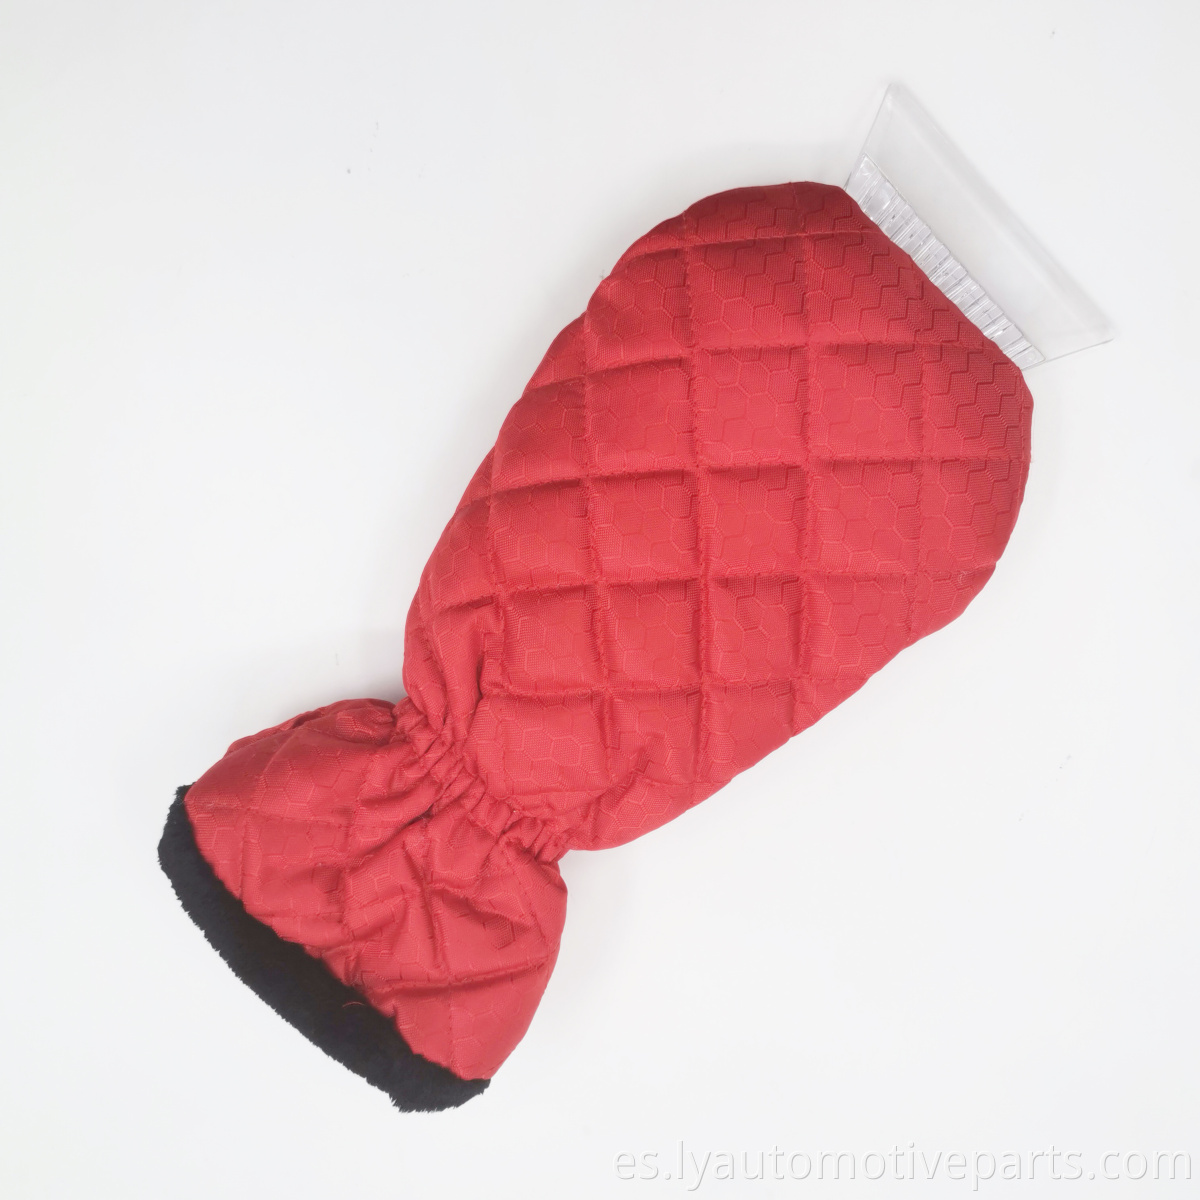 Waterproof Ice Scraper Mitt Snow Remover with Lined of Thick Fleece for Car Windshield